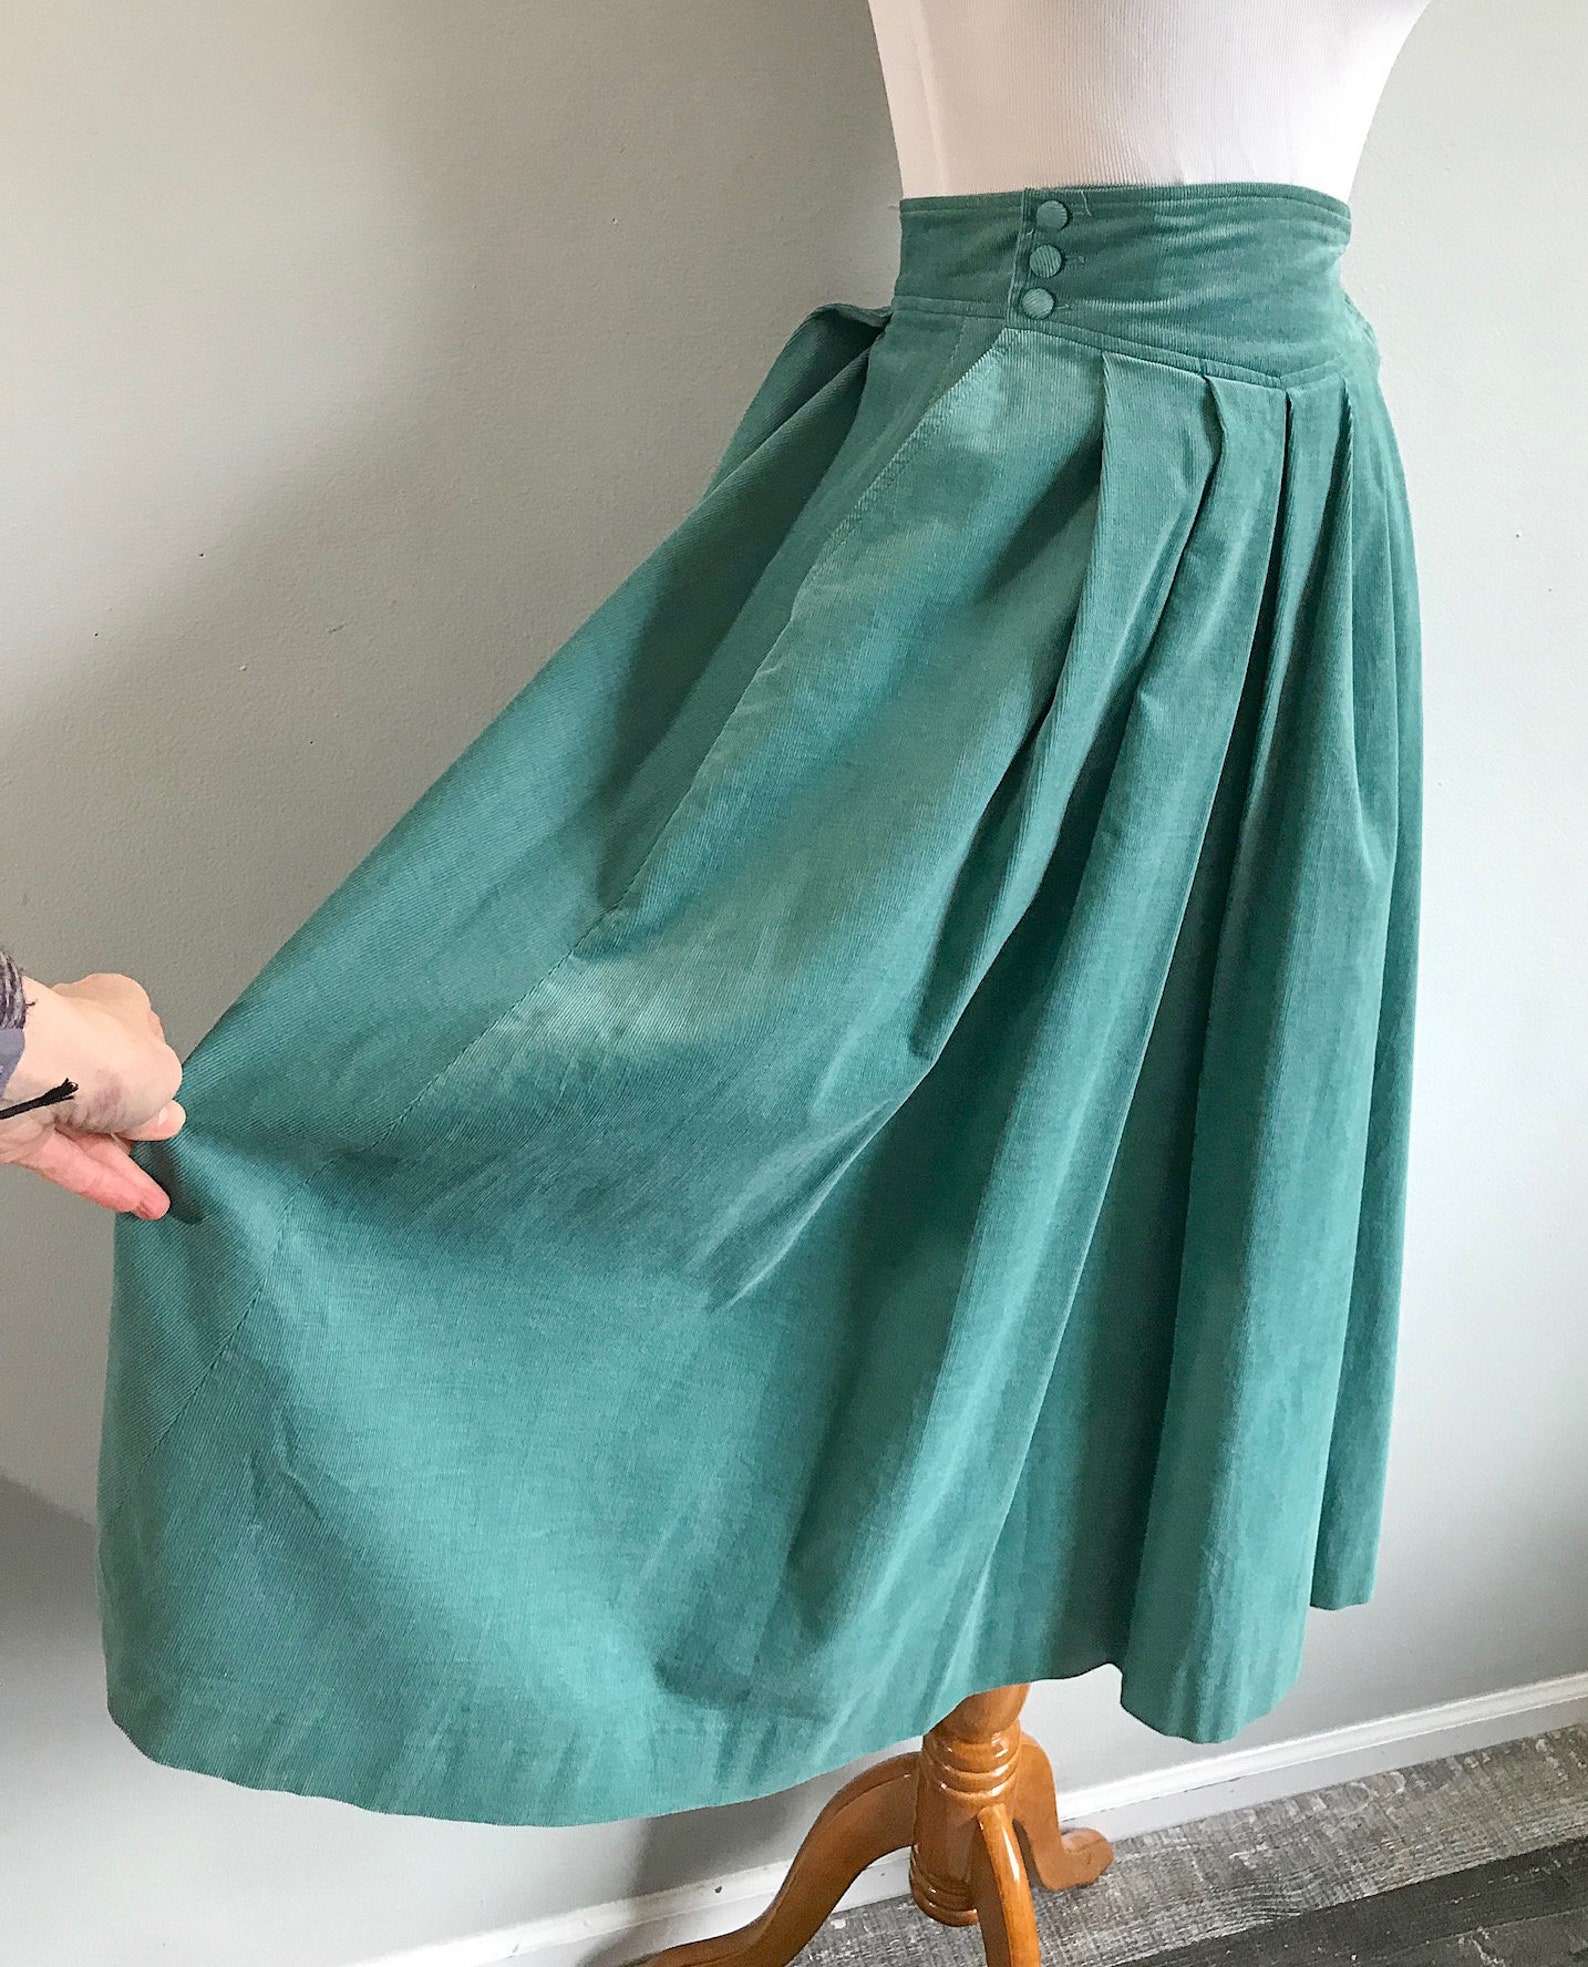 Vintage Laura Ashley Skirt Fit and Flare Pleated Pockets Lined | Etsy